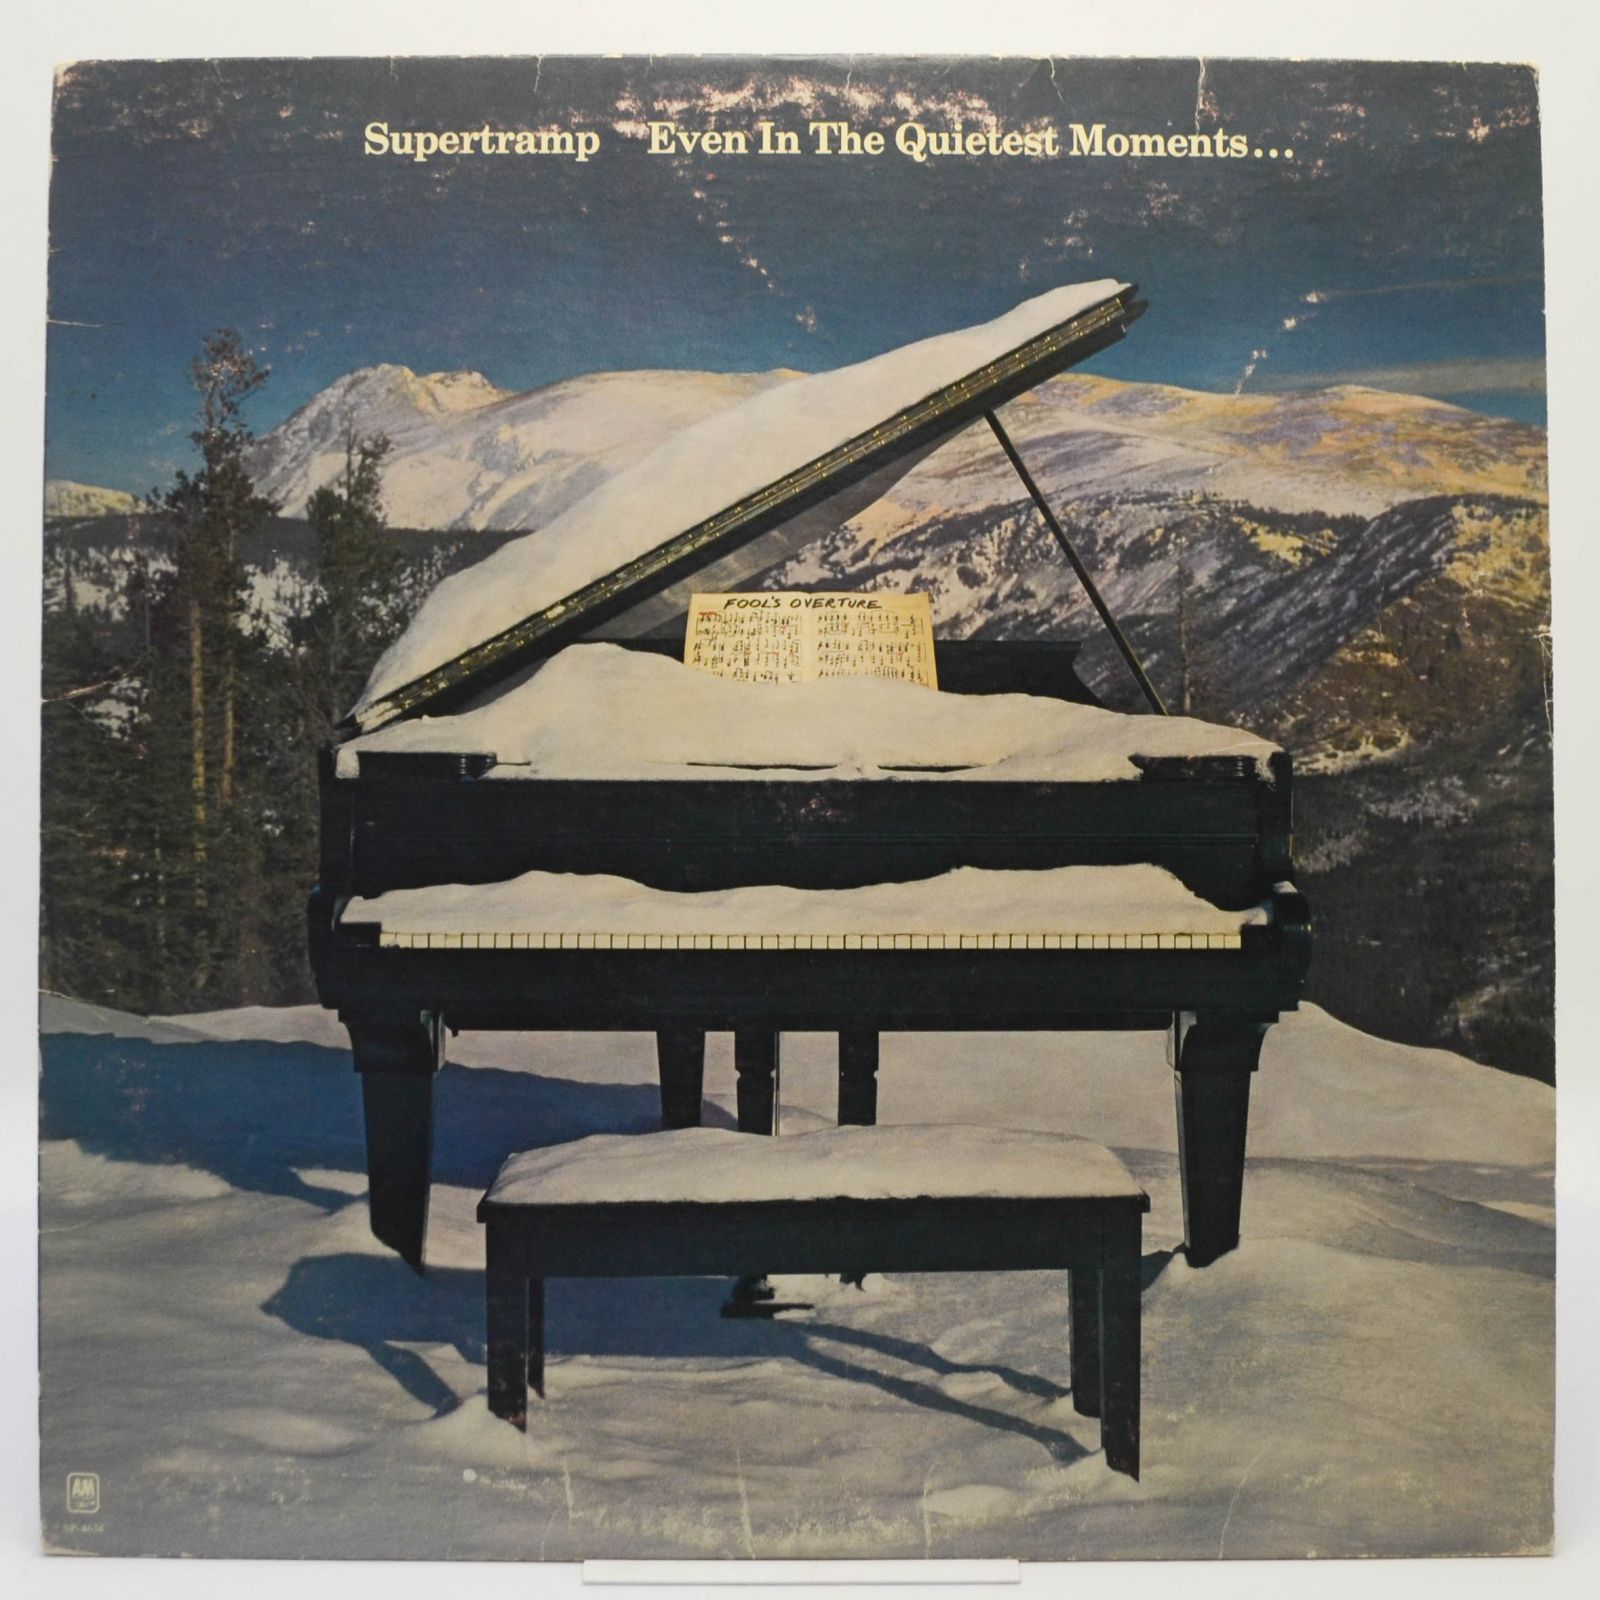 Supertramp — Even In The Quietest Moments, 1977